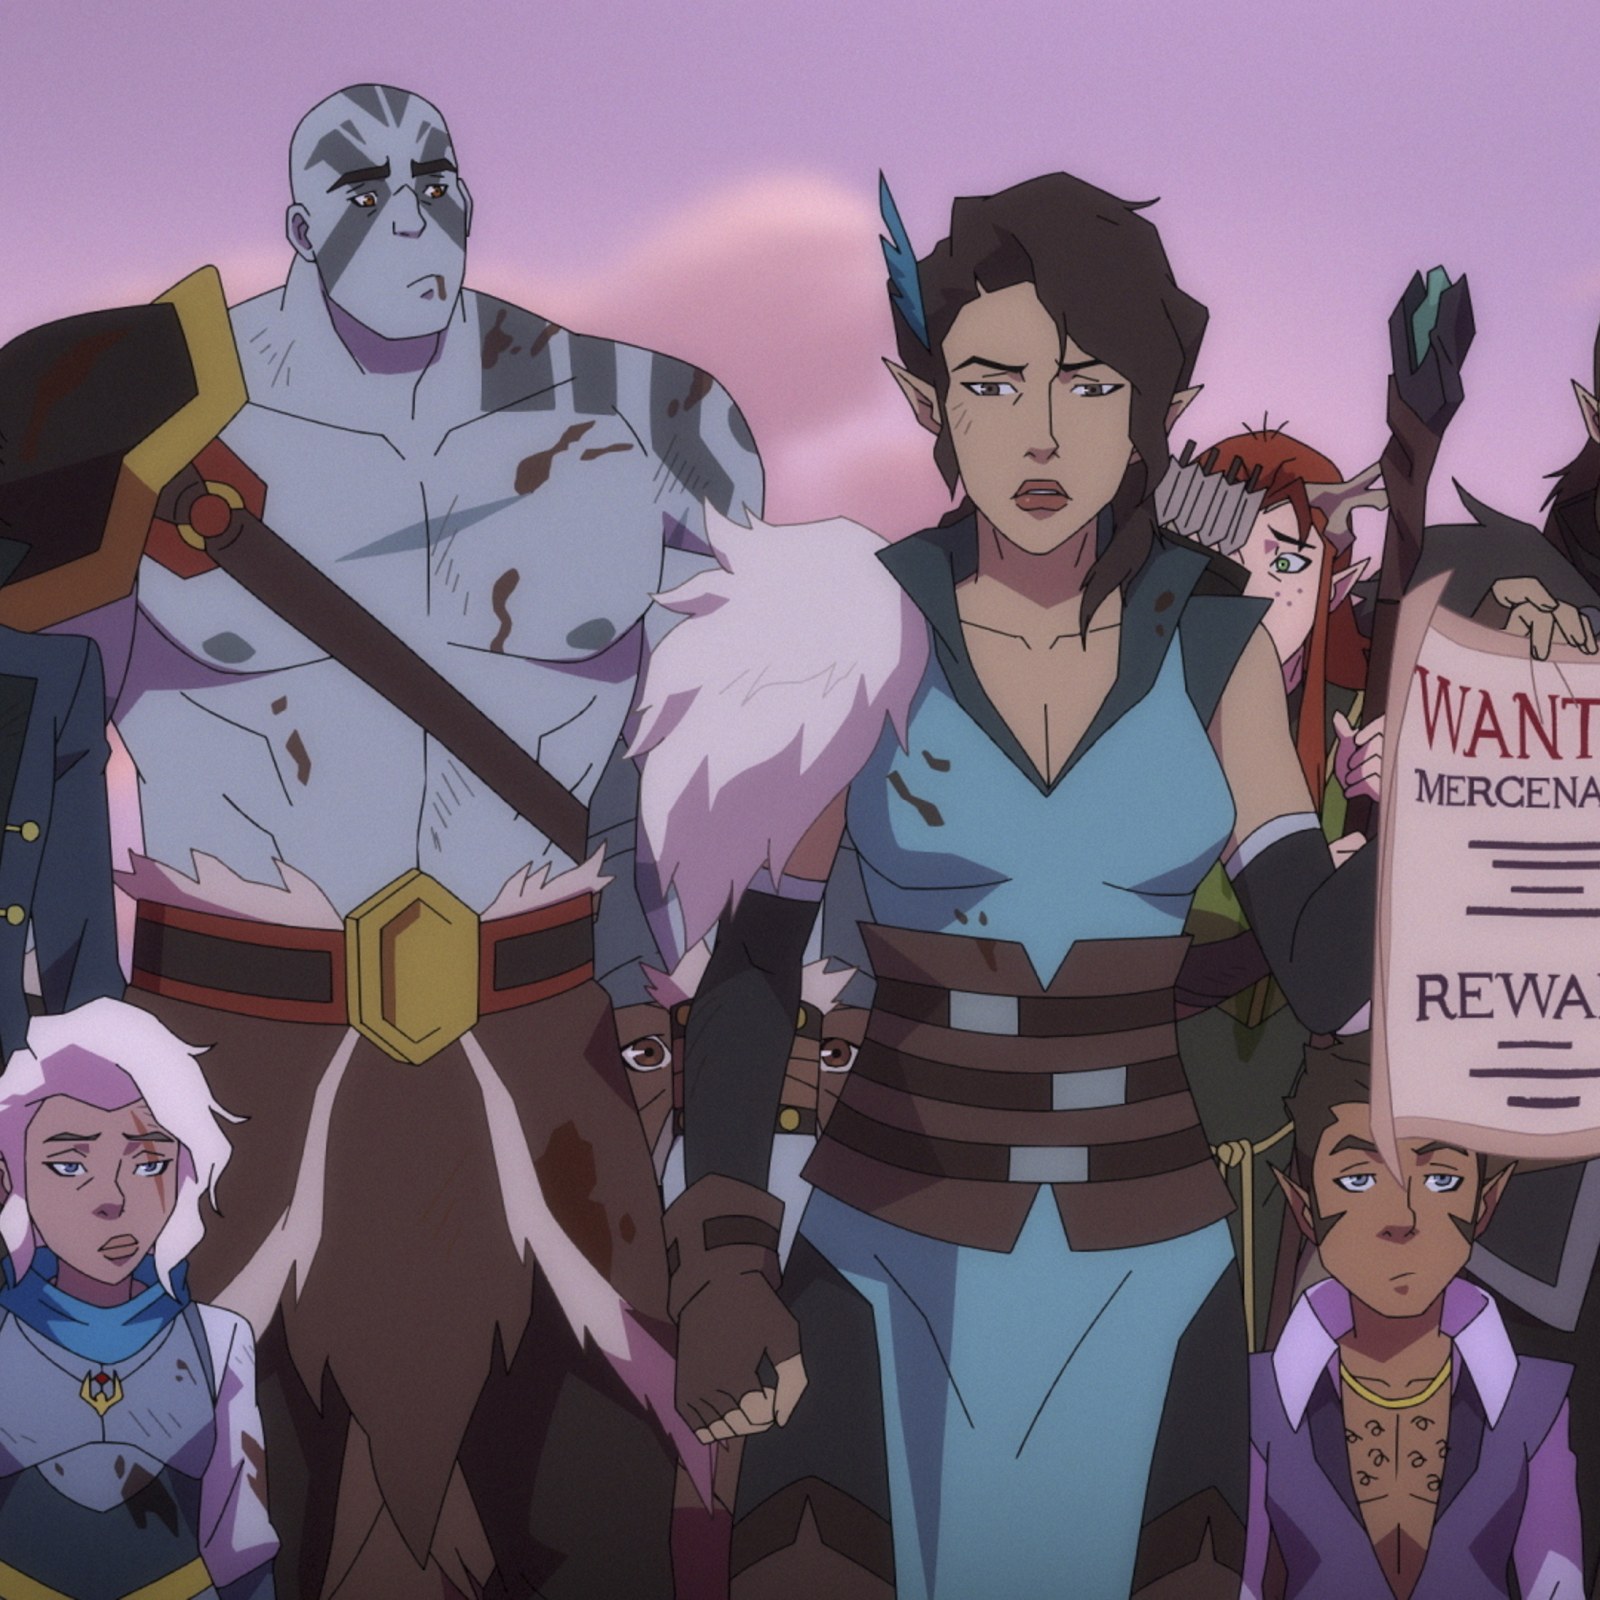 The Legend of Vox Machina' Cast on How They Turned 'Critical Role